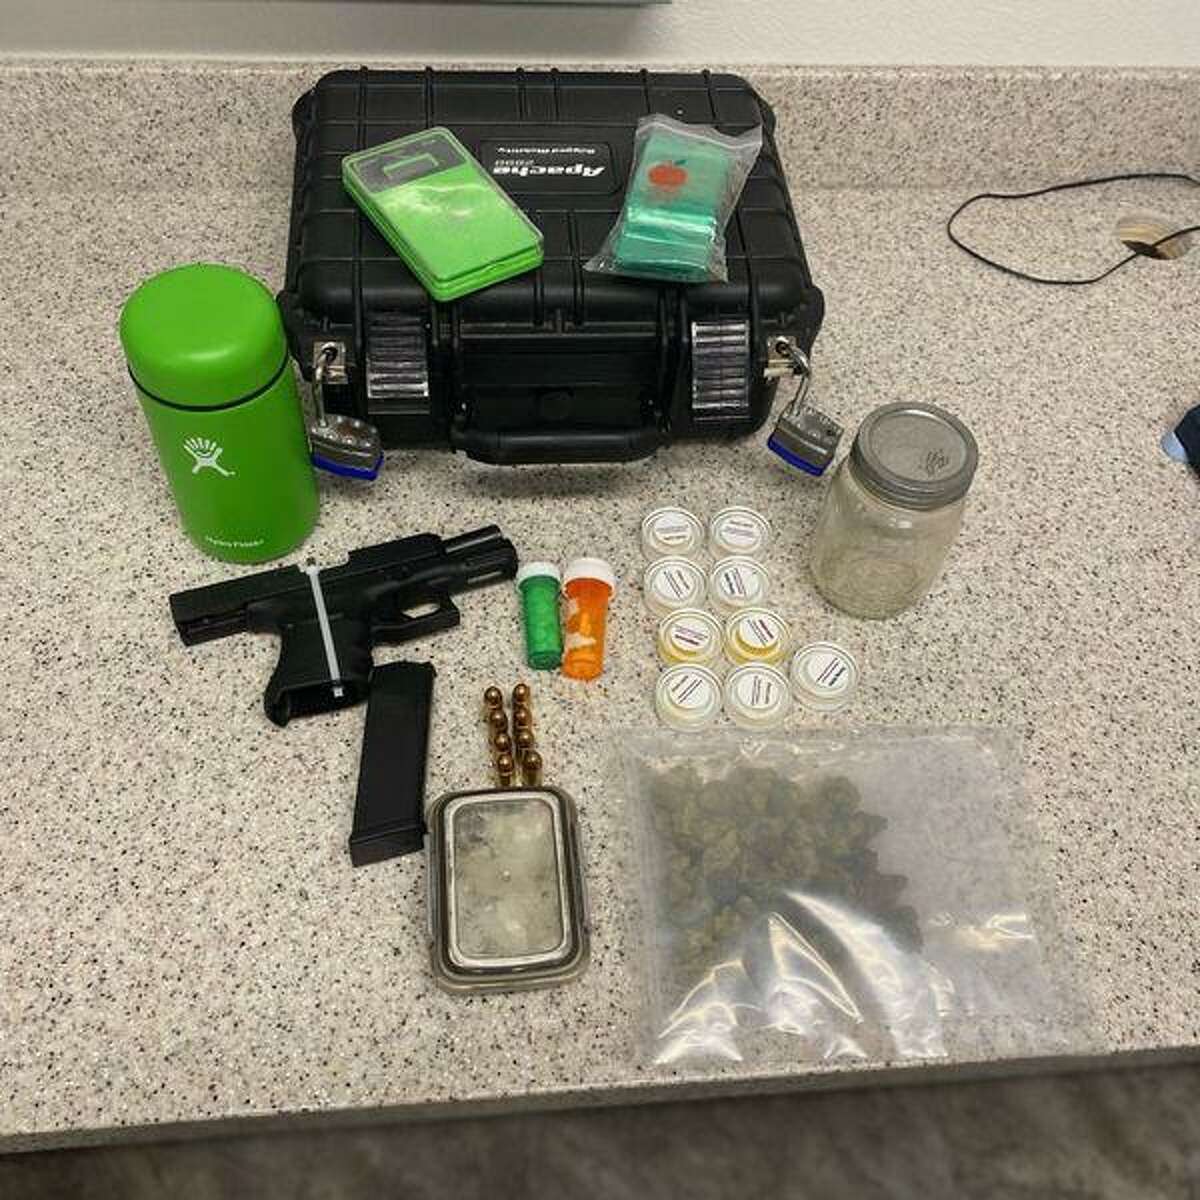 On Friday, June 10 in Northwest Houston, an arrest by deputies with Ted Heap, Harris County Constable Precinct 5, aided by police K-9 Tiger, found more than 400 grams of illegal drugs and an illegal firearm.